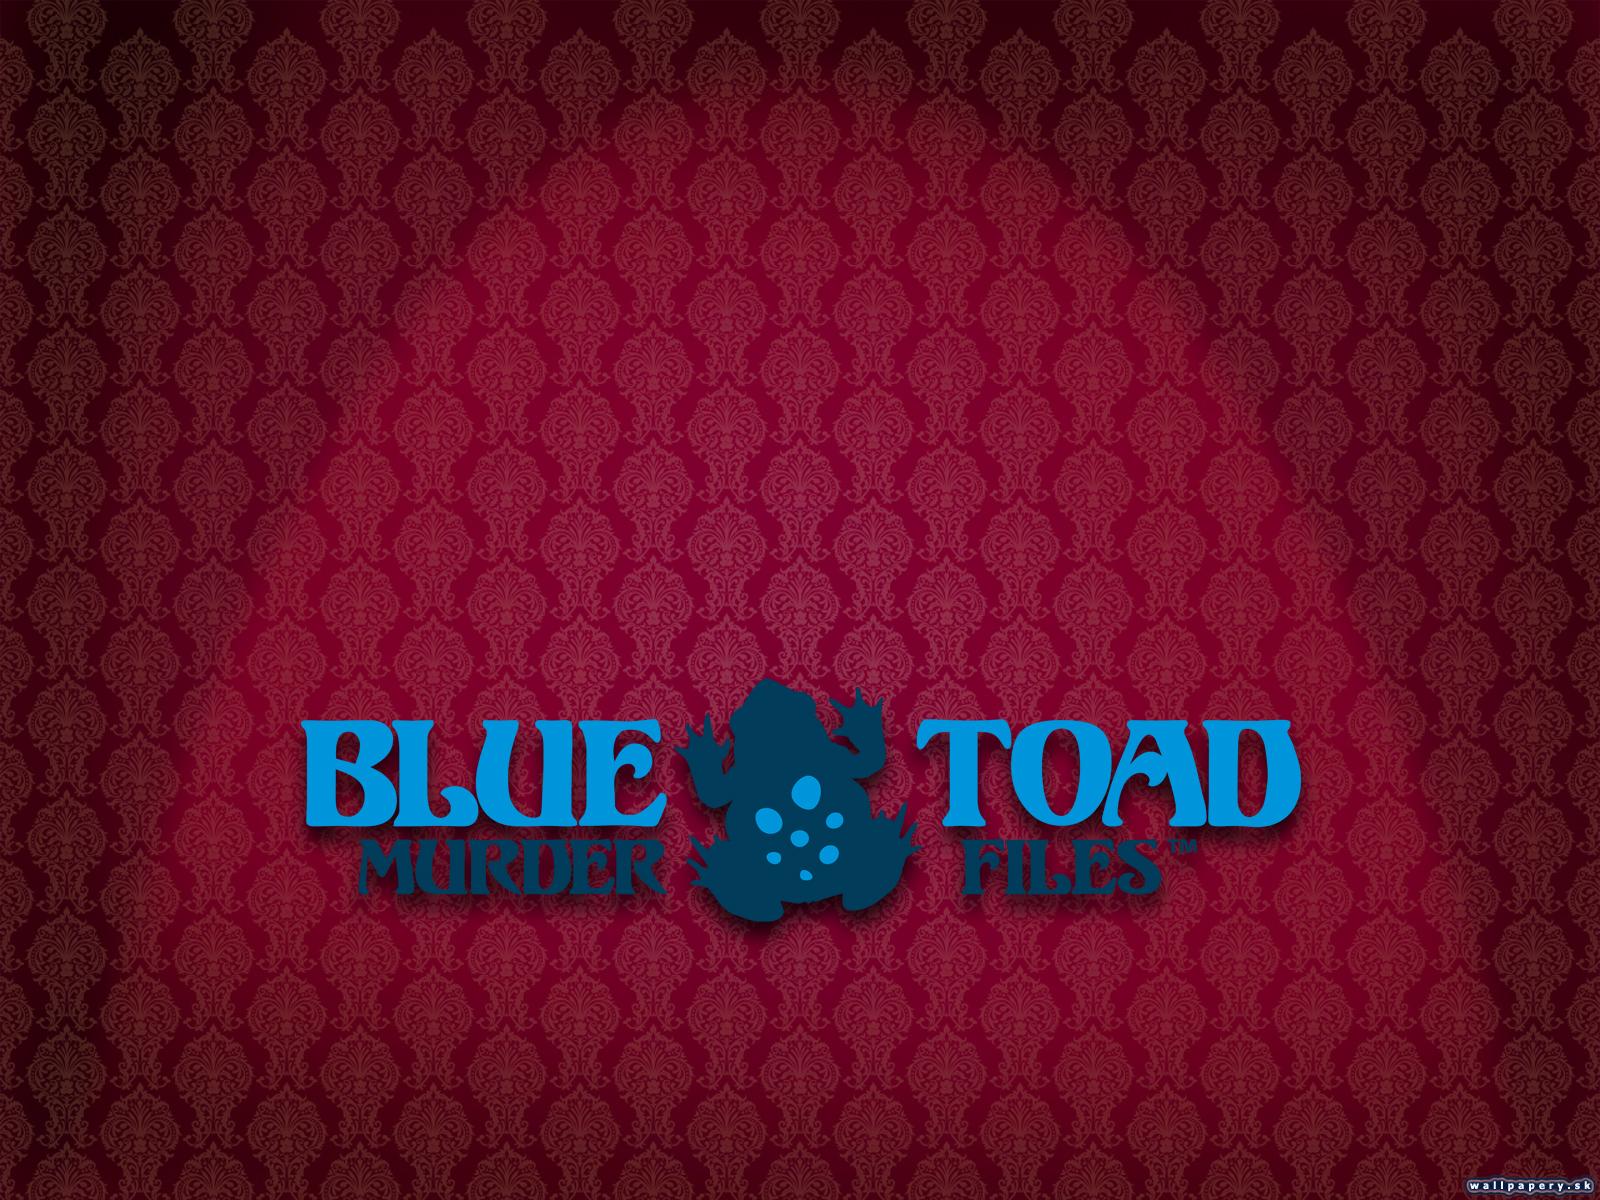 Blue Toad Murder Files: The Mysteries of Little Riddle - wallpaper 3